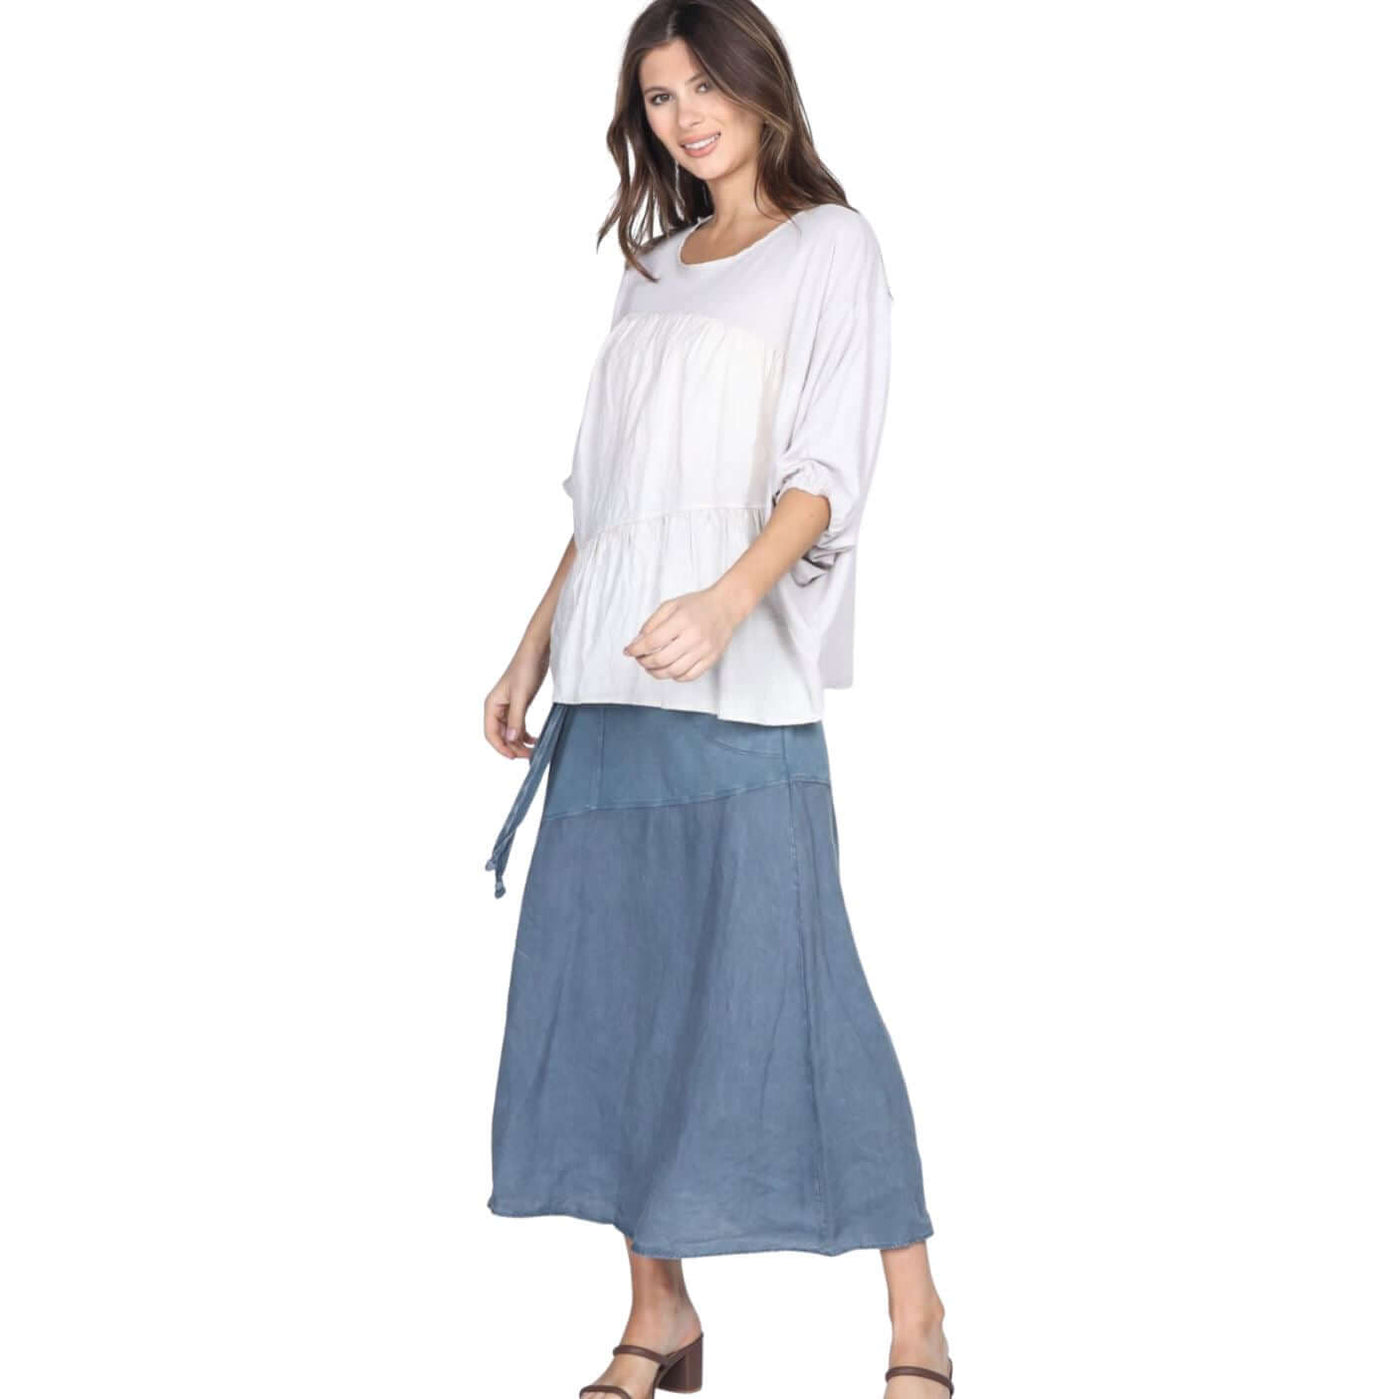 M. Rena Mineral Washed Oversized Linen Top with Pleating in Front | Style# S5000A | Made in USA | Natural Linen & Cotton Fabric | Ladies Made In America Clothing | Color: Bone